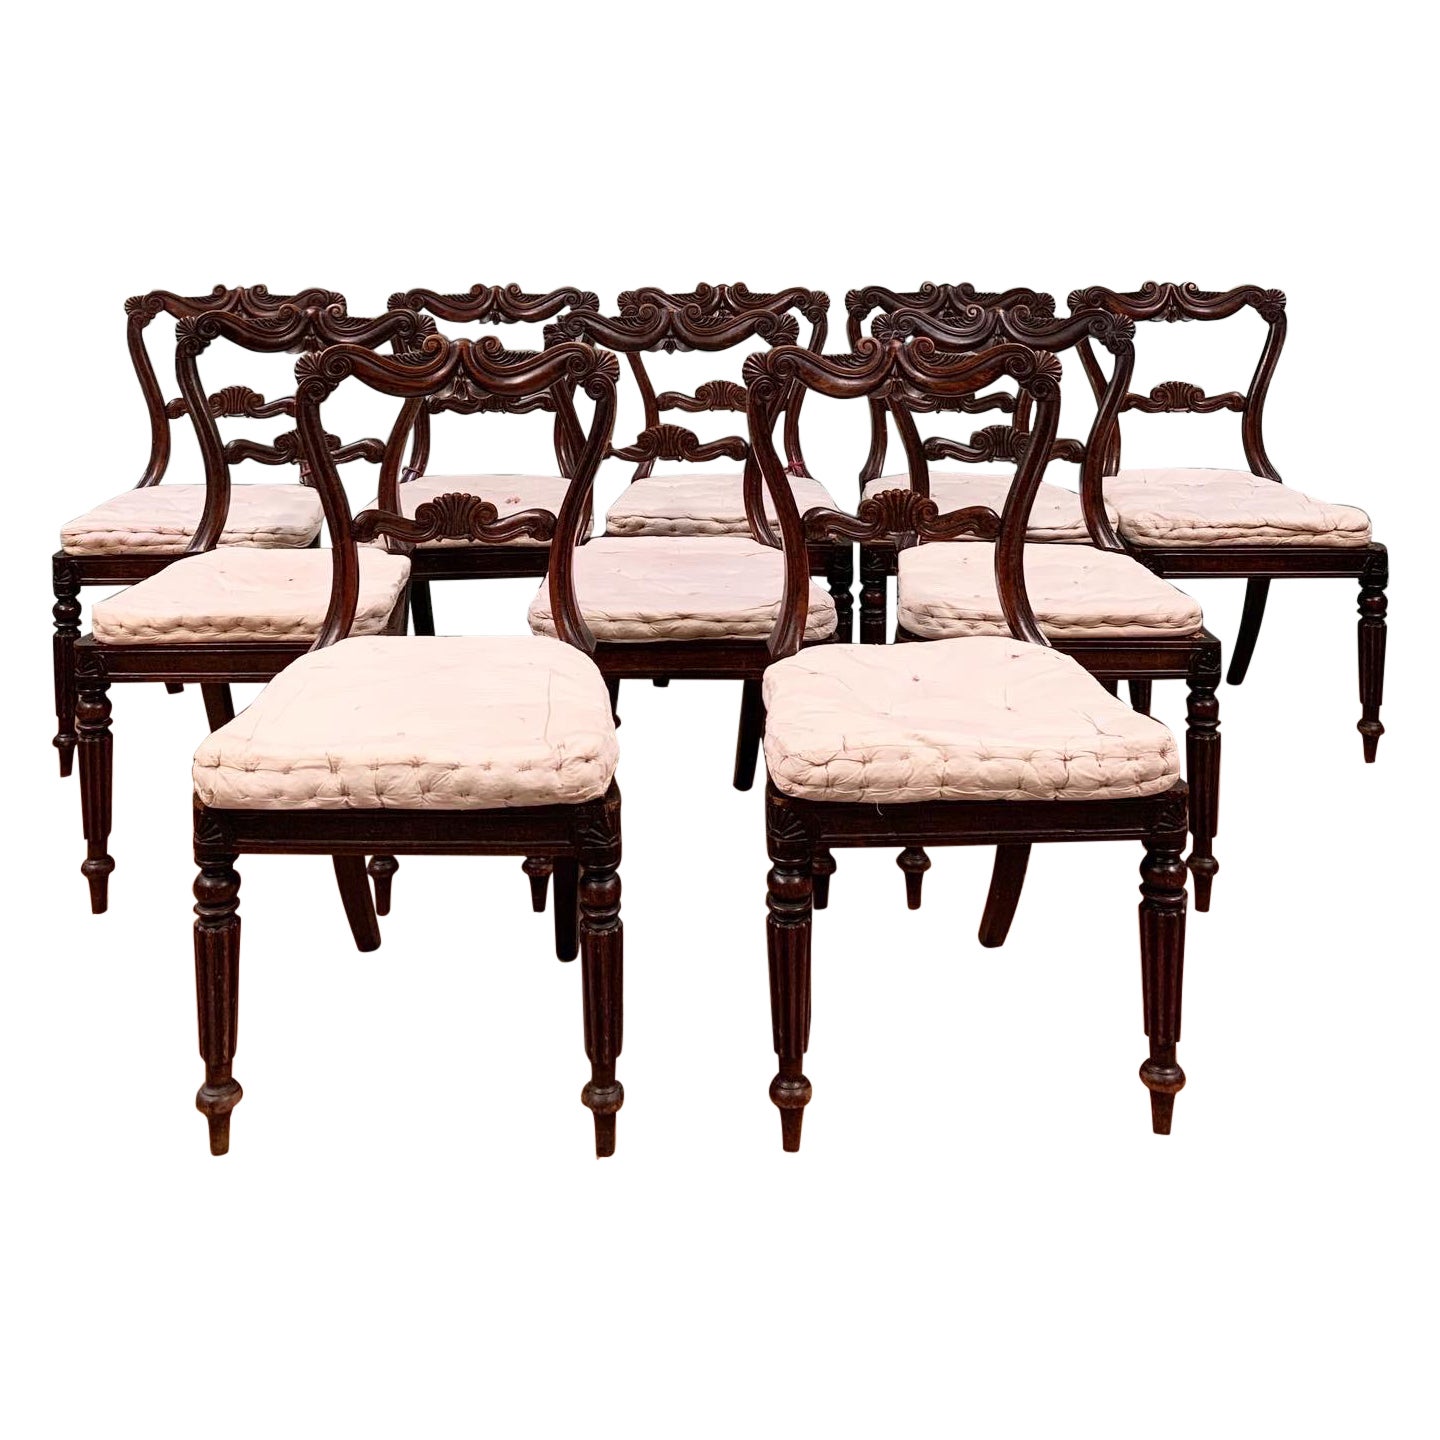 A Fine Set of Ten George IV Dining Chairs, attributed to Gillows